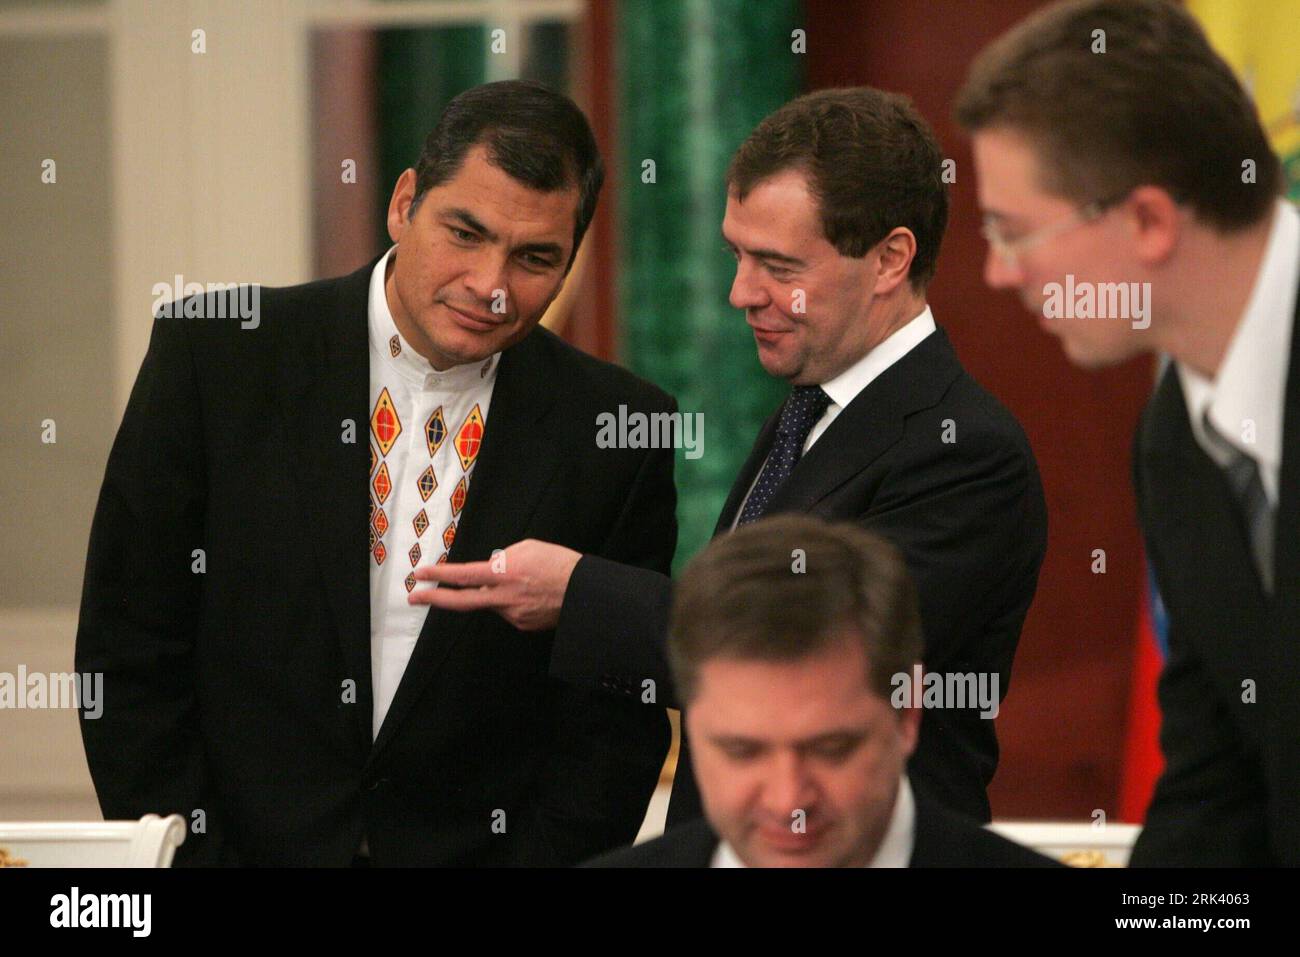 Bildnummer: 53562614  Datum: 29.10.2009  Copyright: imago/Xinhua (091030) -- MOSCOW, Oct. 30, 2009 (Xinhua) -- Russian President Dmitry Medvedev (R, back) chats with Ecuadoran President Rafael Correa (L, back) during a document signing ceremony after meeting at the Kremlin in Moscow, capital of Russia, October 29, 2009. They signed a declaration of strategic partnership between the two countries at the Kremlin on Thursday. (Xinhua/Alexandrov) (ypf) (2)RUSSIA-ECUADOR-MEDVEDEV-CORREA-MEETING PUBLICATIONxNOTxINxCHN People Politik premiumd kbdig xng 2009 quer     Bildnummer 53562614 Date 29 10 200 Stock Photo